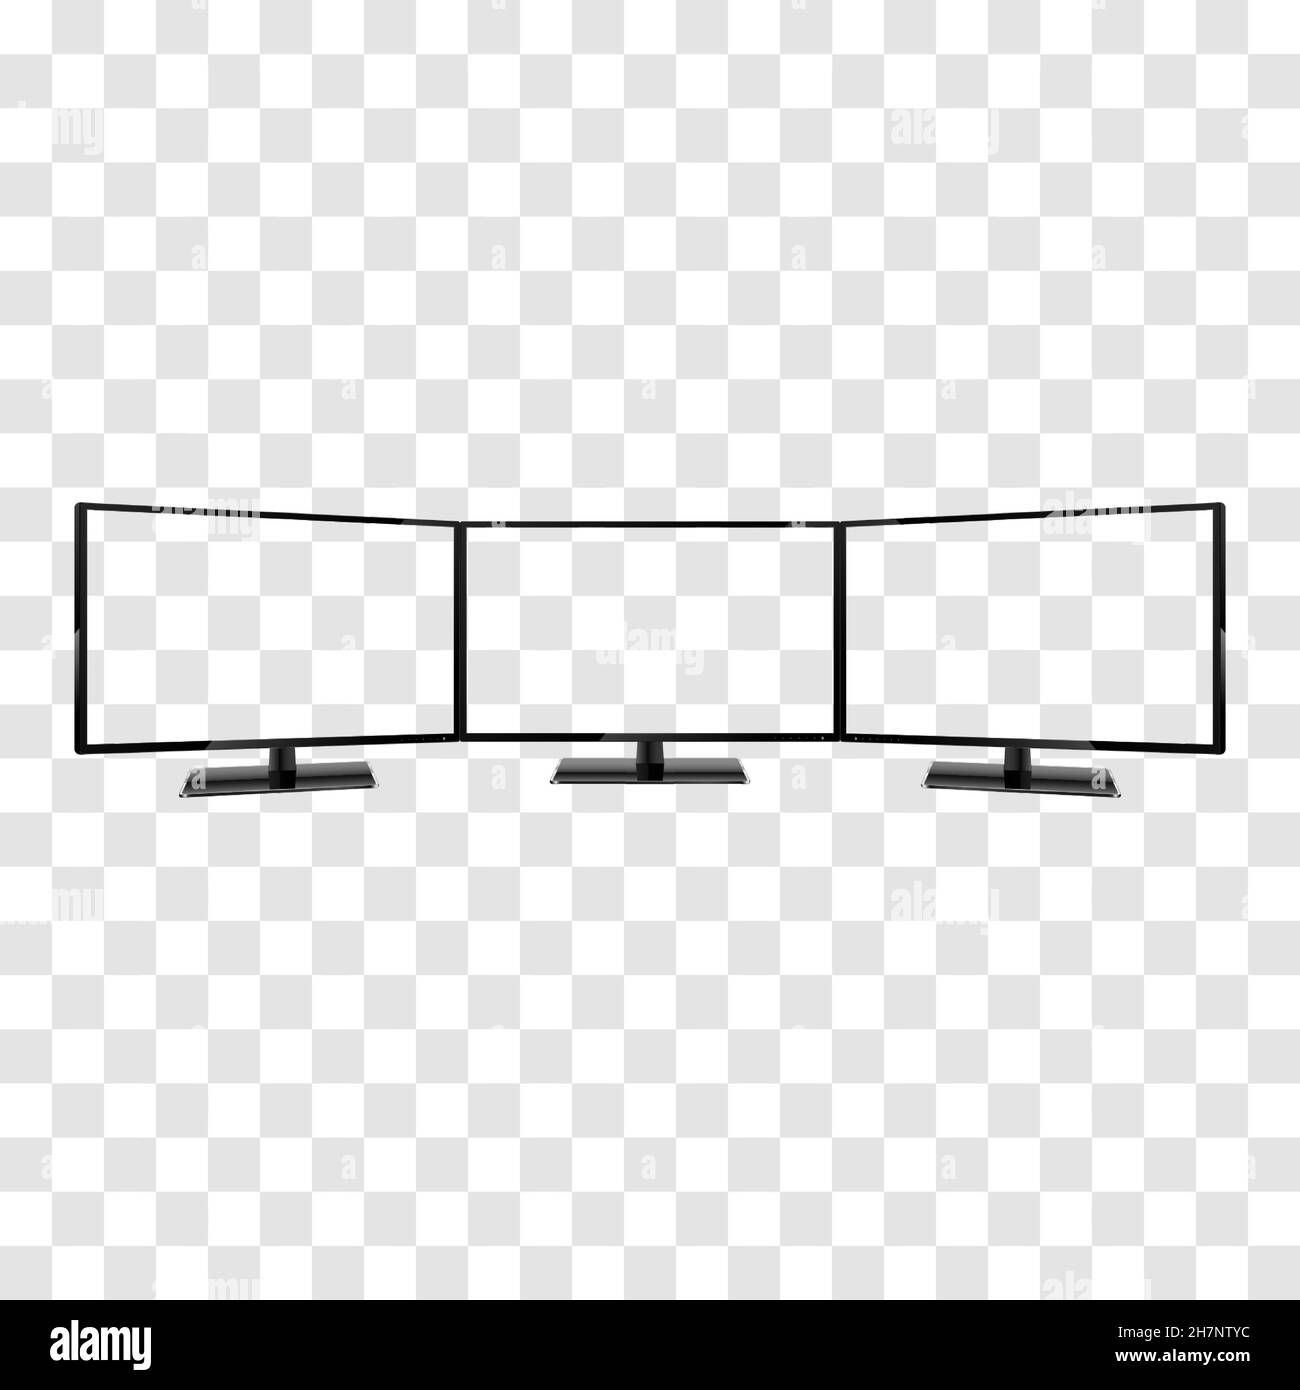 Three Computer Monitors Mockup isolated on transparent background. Triple monitor computer super wide screen device. Stock Vector